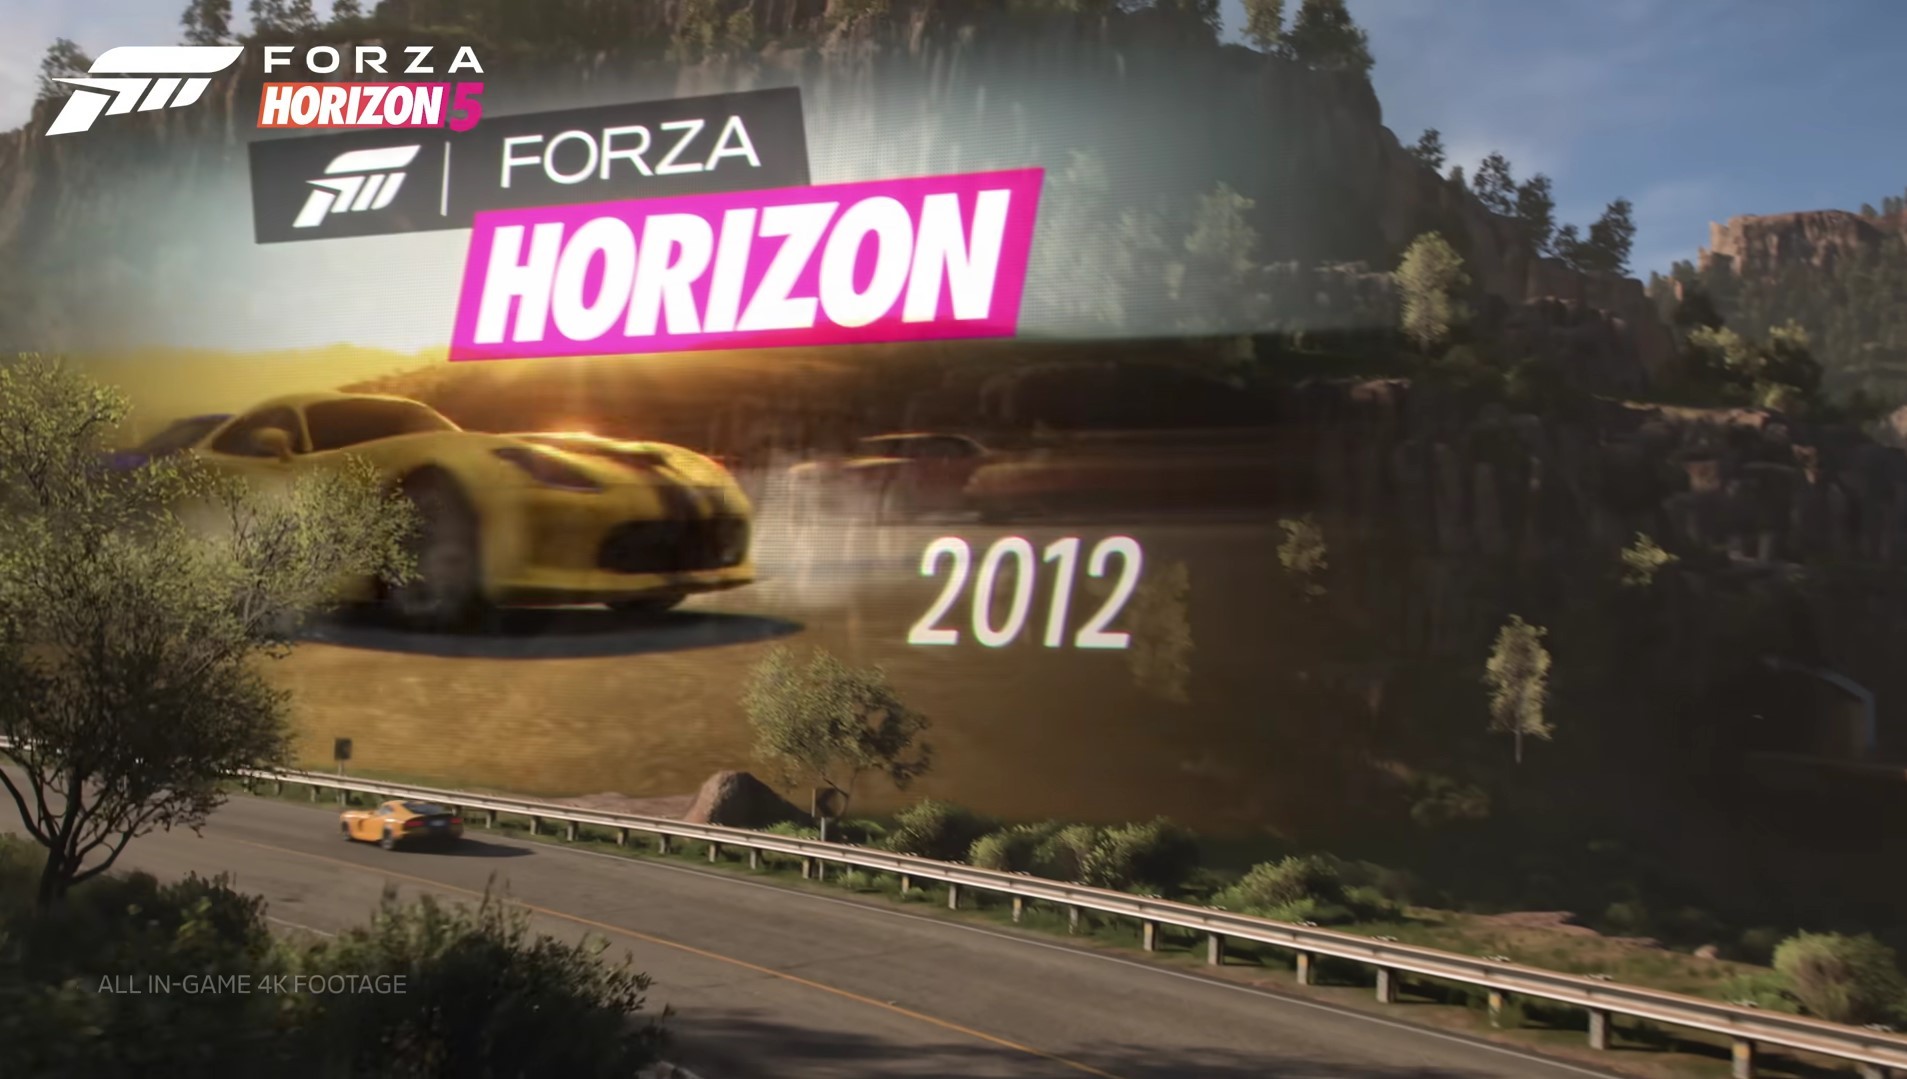 Forza Horizon 5 New Update Coming in October To Celebrate 10 Years of